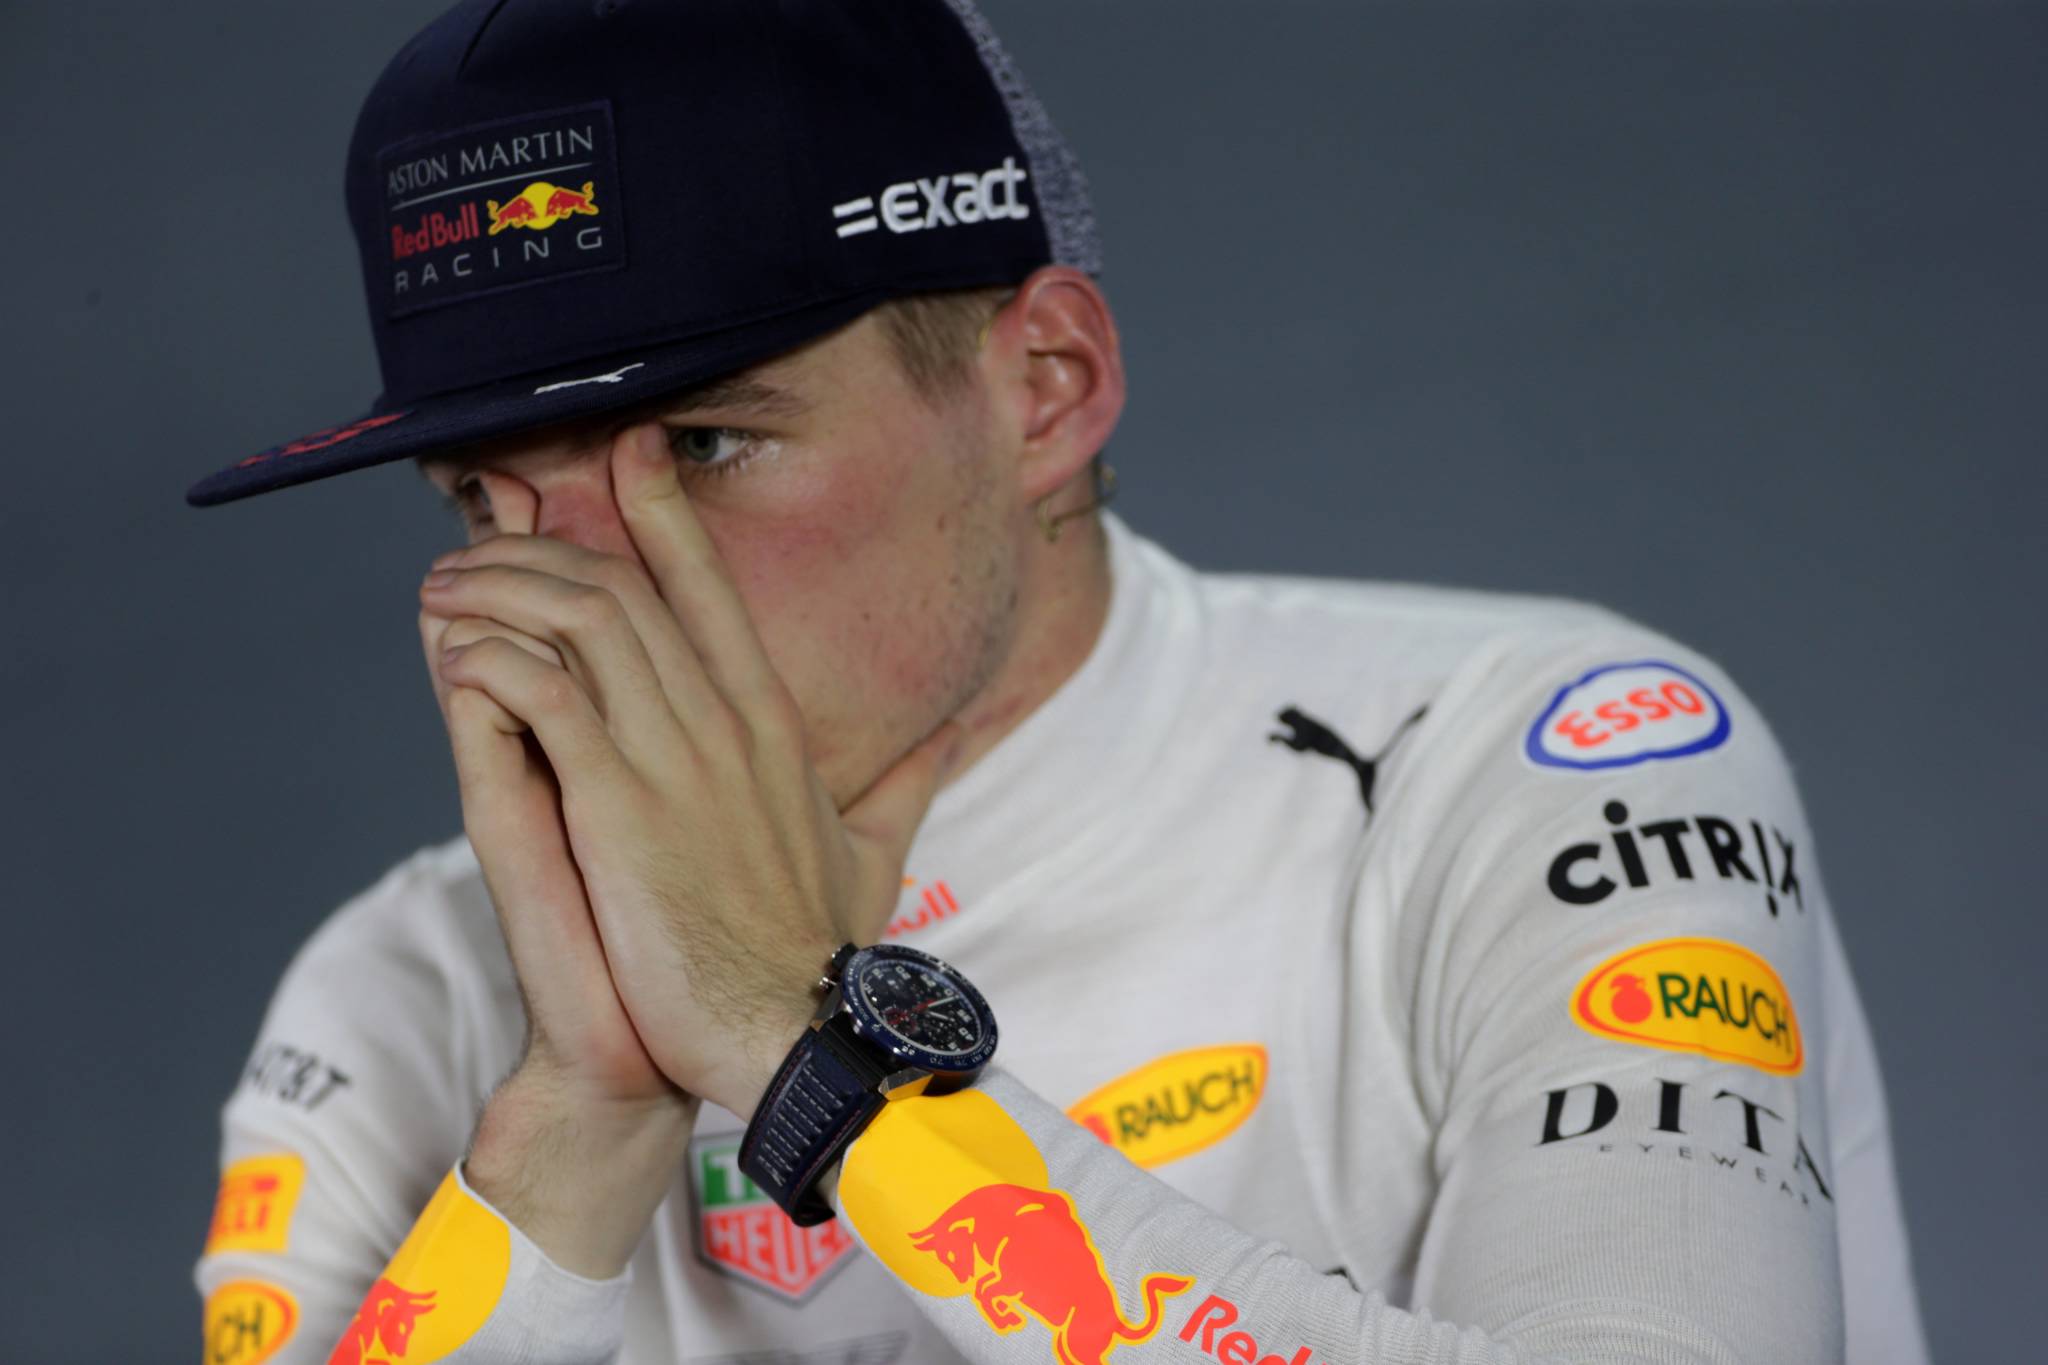 25.11.2018 - Race, Press conference, Max Verstappen (NED) Red Bull Racing RB14 